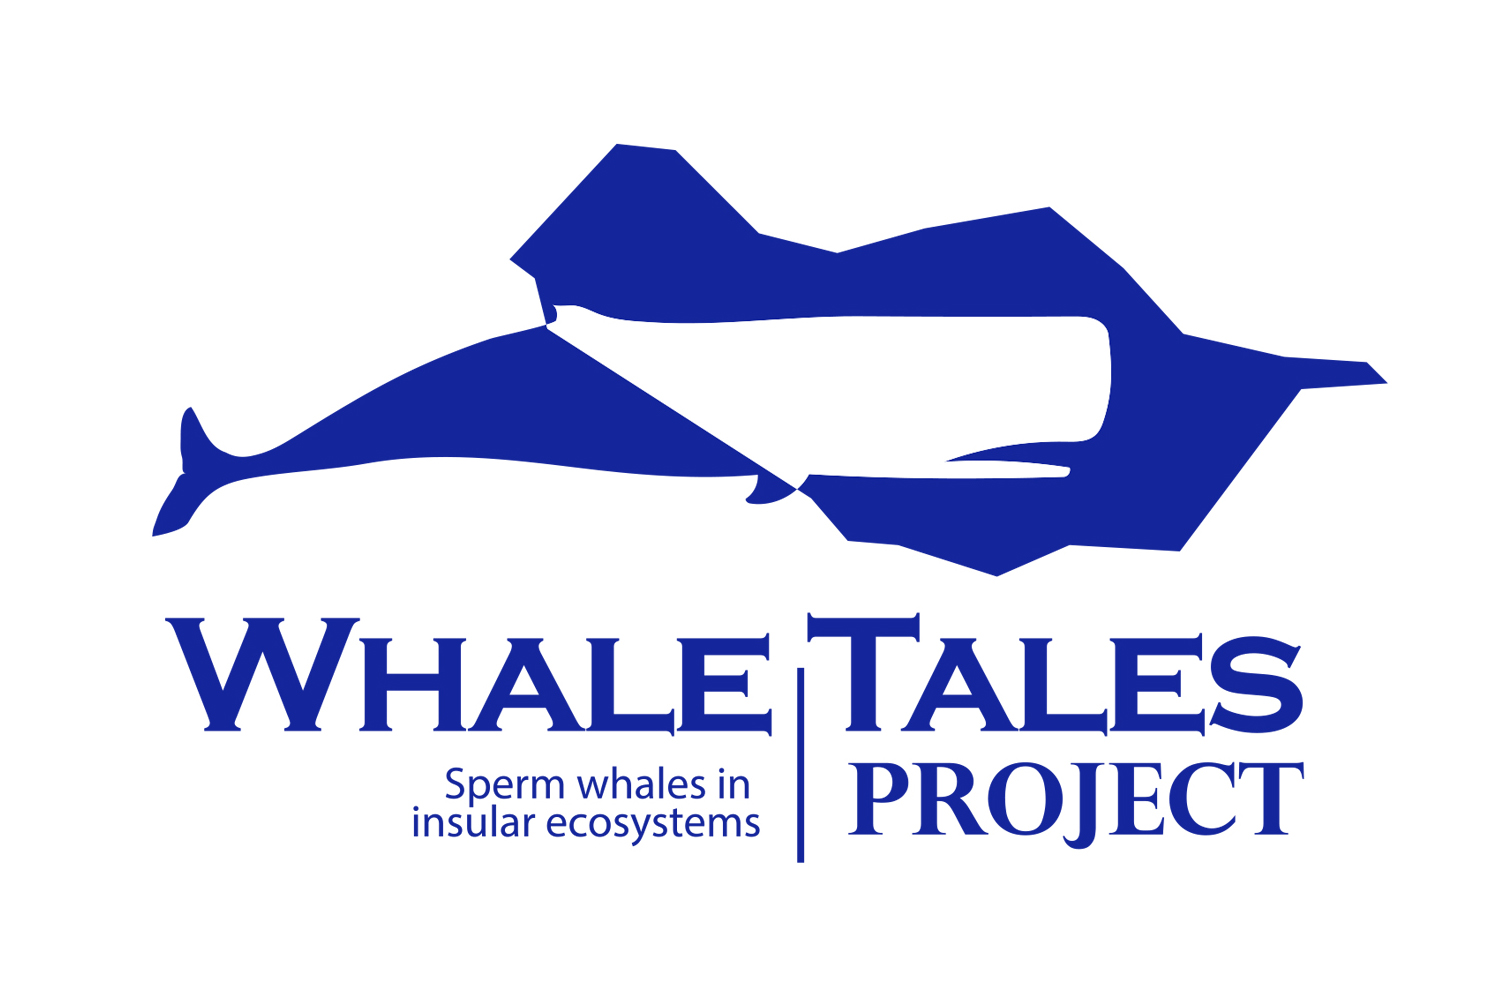 WHALETALES Project